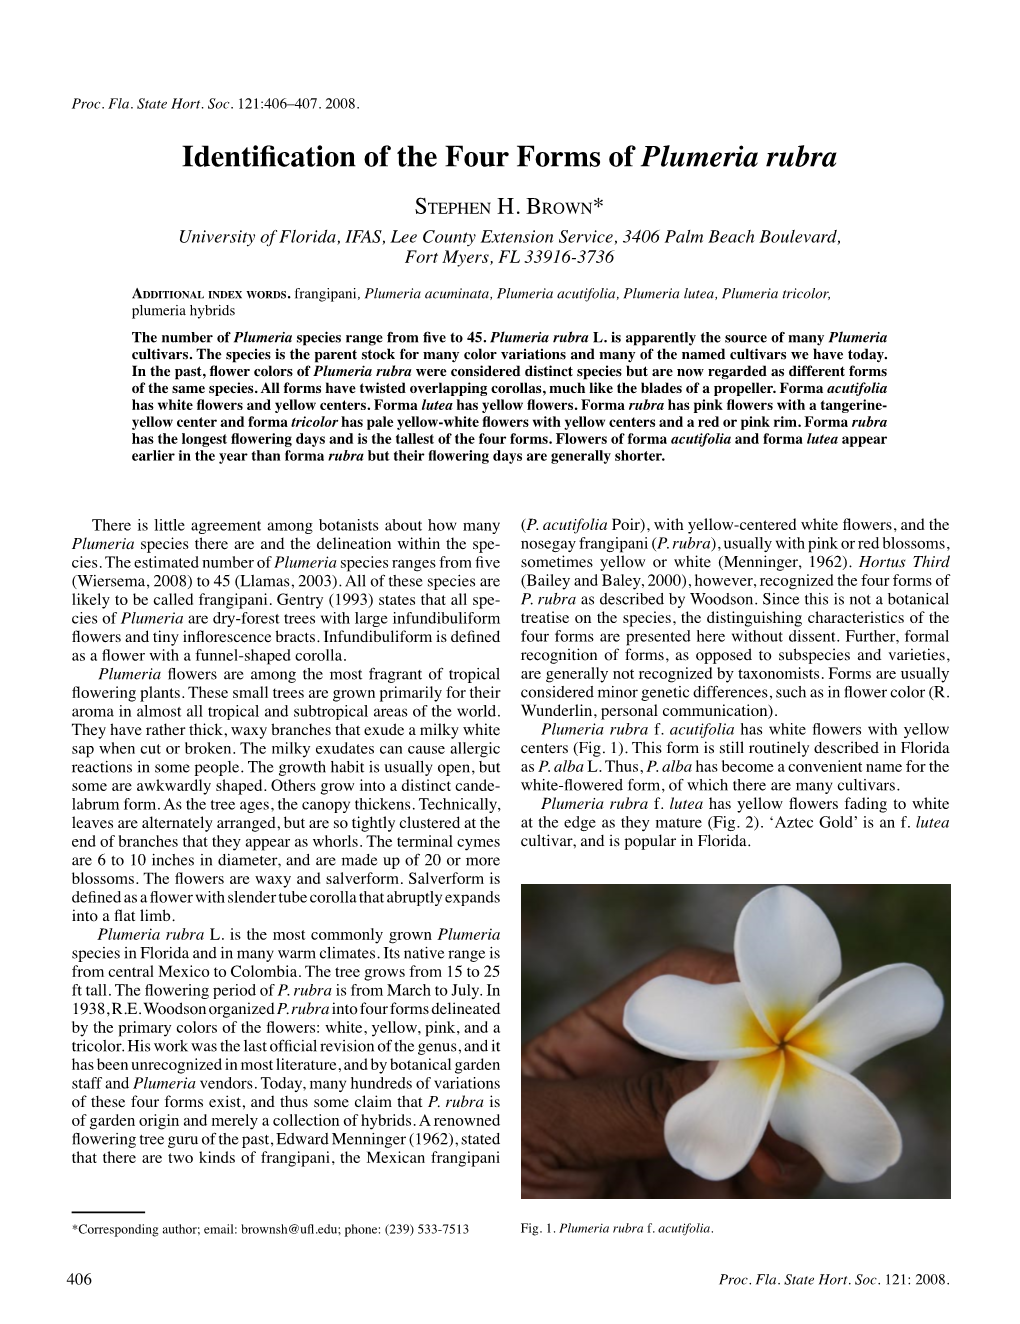 Identification of the Four Forms of Plumeria Rubra